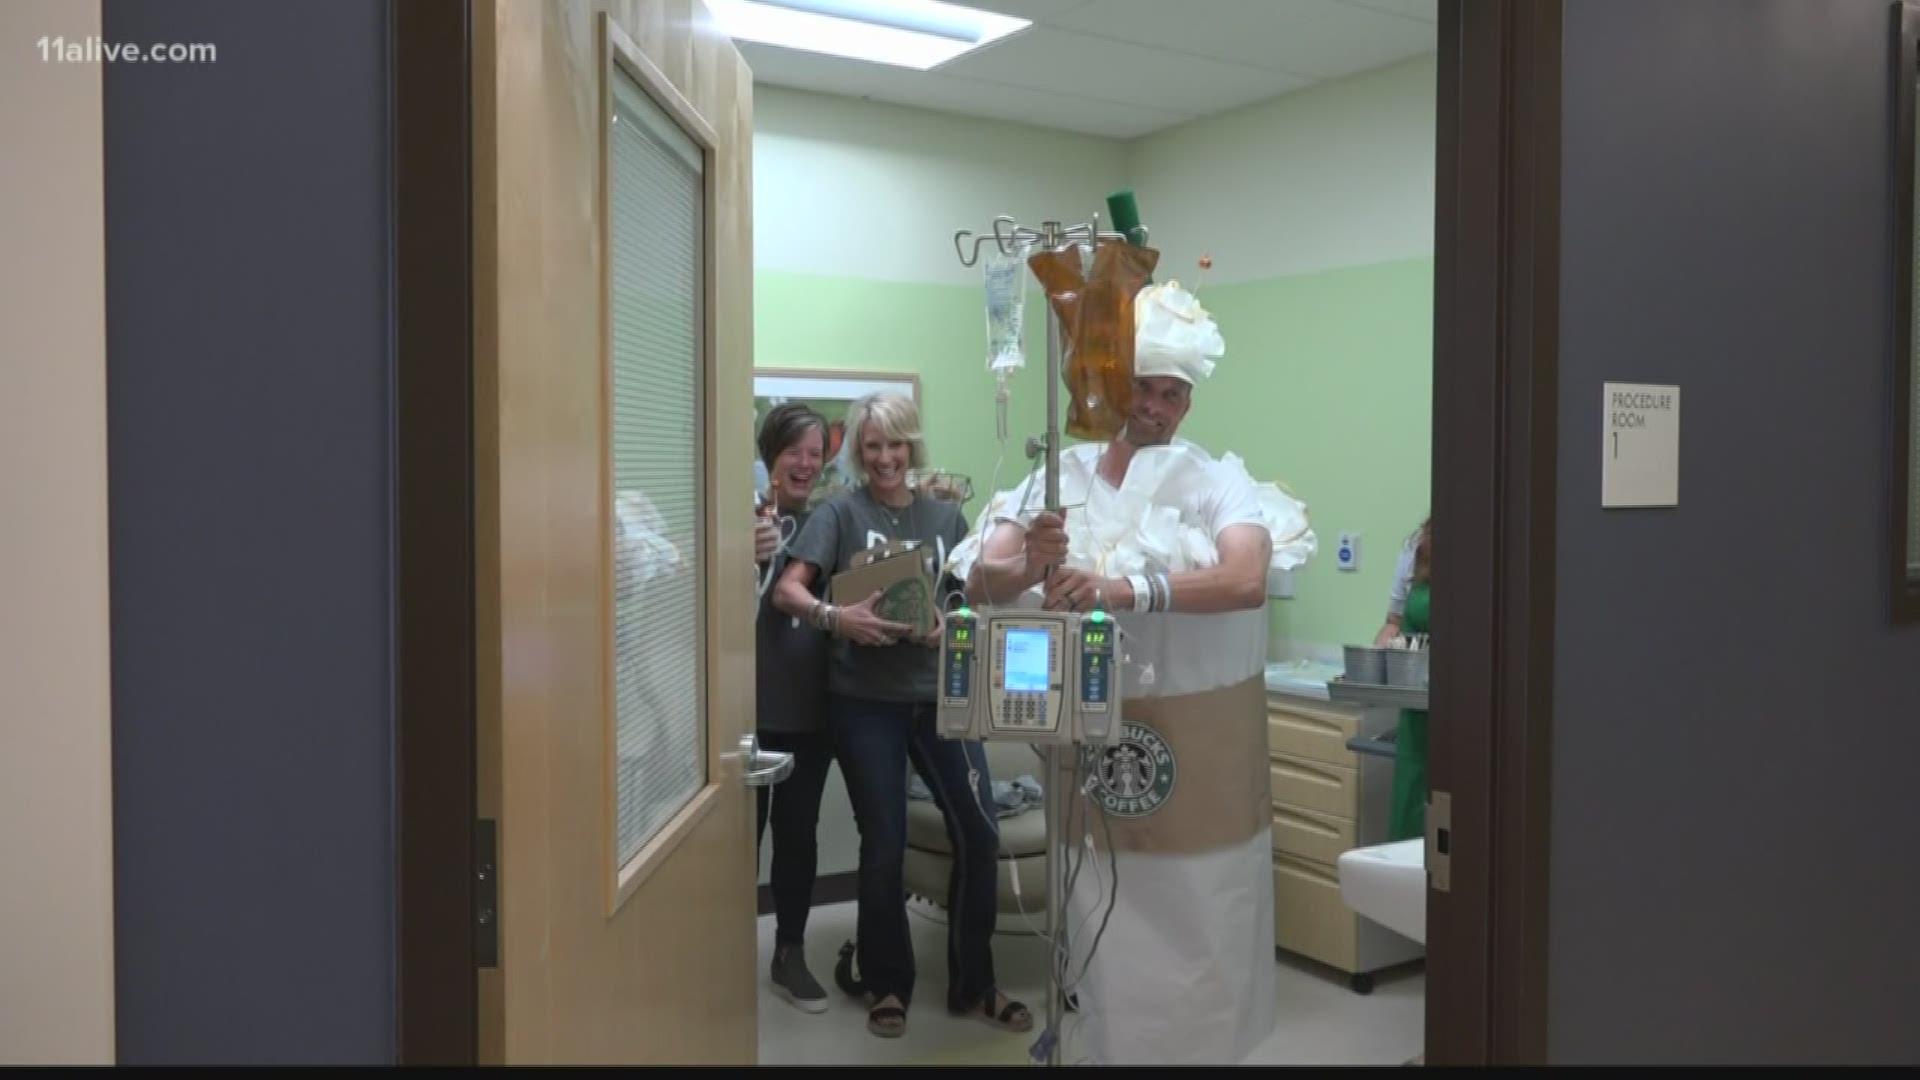 Decked out as a giant latte and toting his chemo pole behind him, he works the room.